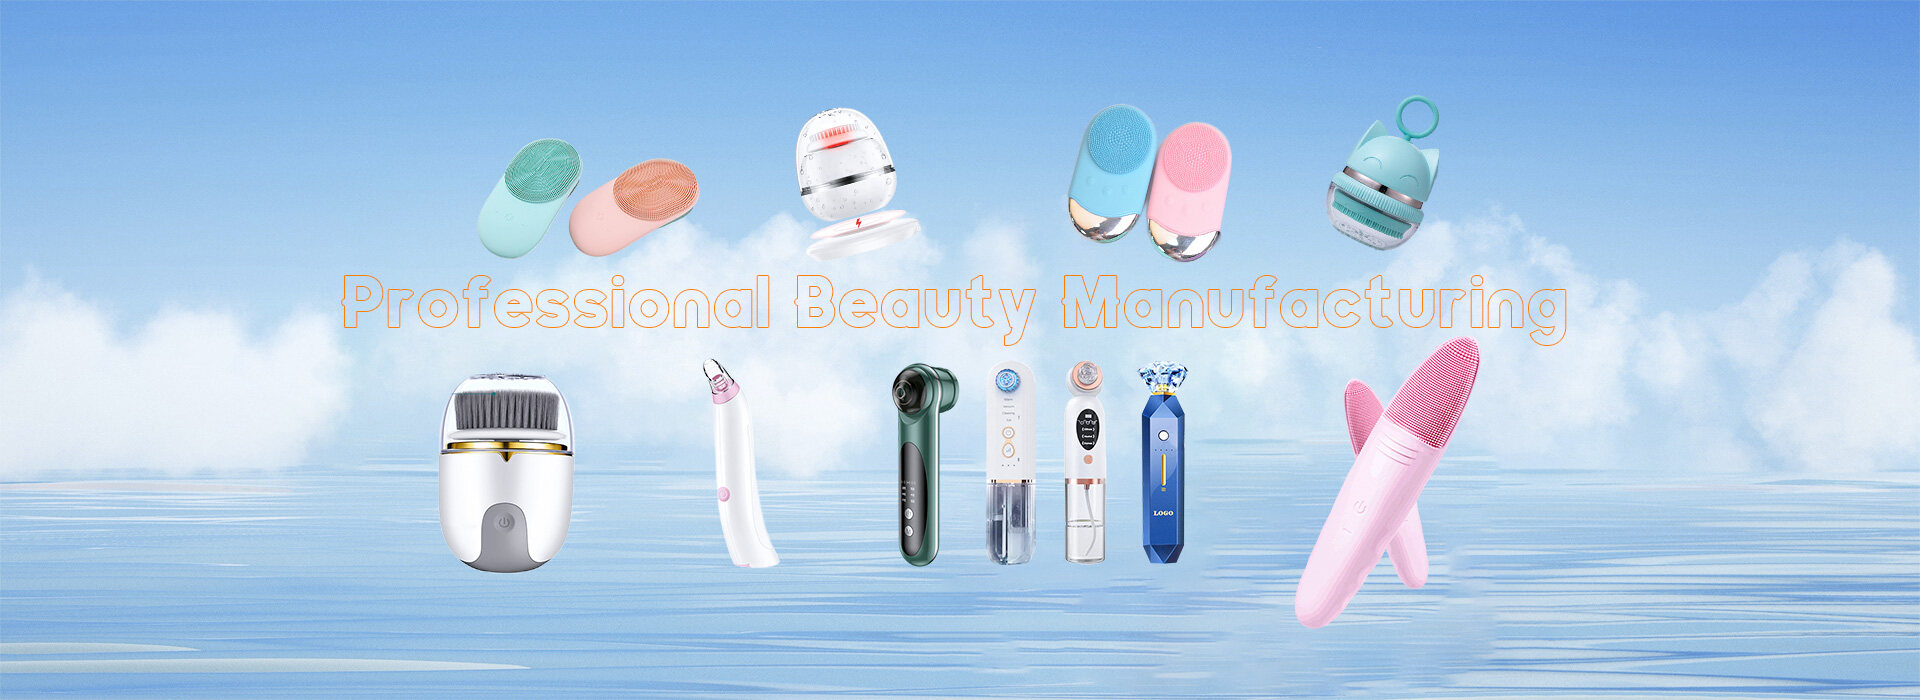 Amazon Hot Sale Skin Roller Cooler Ice Facial Roller Lift Ice Roller For Eye Puffiness Migraine,New Disposable Titanium 0.25mm Micro Needle Skin Body Cleaning Customize 540 Needle Derma Roller Beard Growth Kit,OEM Custom LOGO Super Professional Studio Flexible Eyebrow Makeup Eyelash Extension Light Lamp White With Clip,New U-shaped Neck Pillow Custom Flannel Eyelash Grafting Beauty Makeup Eyelash Extension Pillow for Beauty Salon hotsale,Wholesale Leafless Air Blower Free Hands Eyelash Extension Fan Dryer For Curing Eyelash Extension Glue Quickly